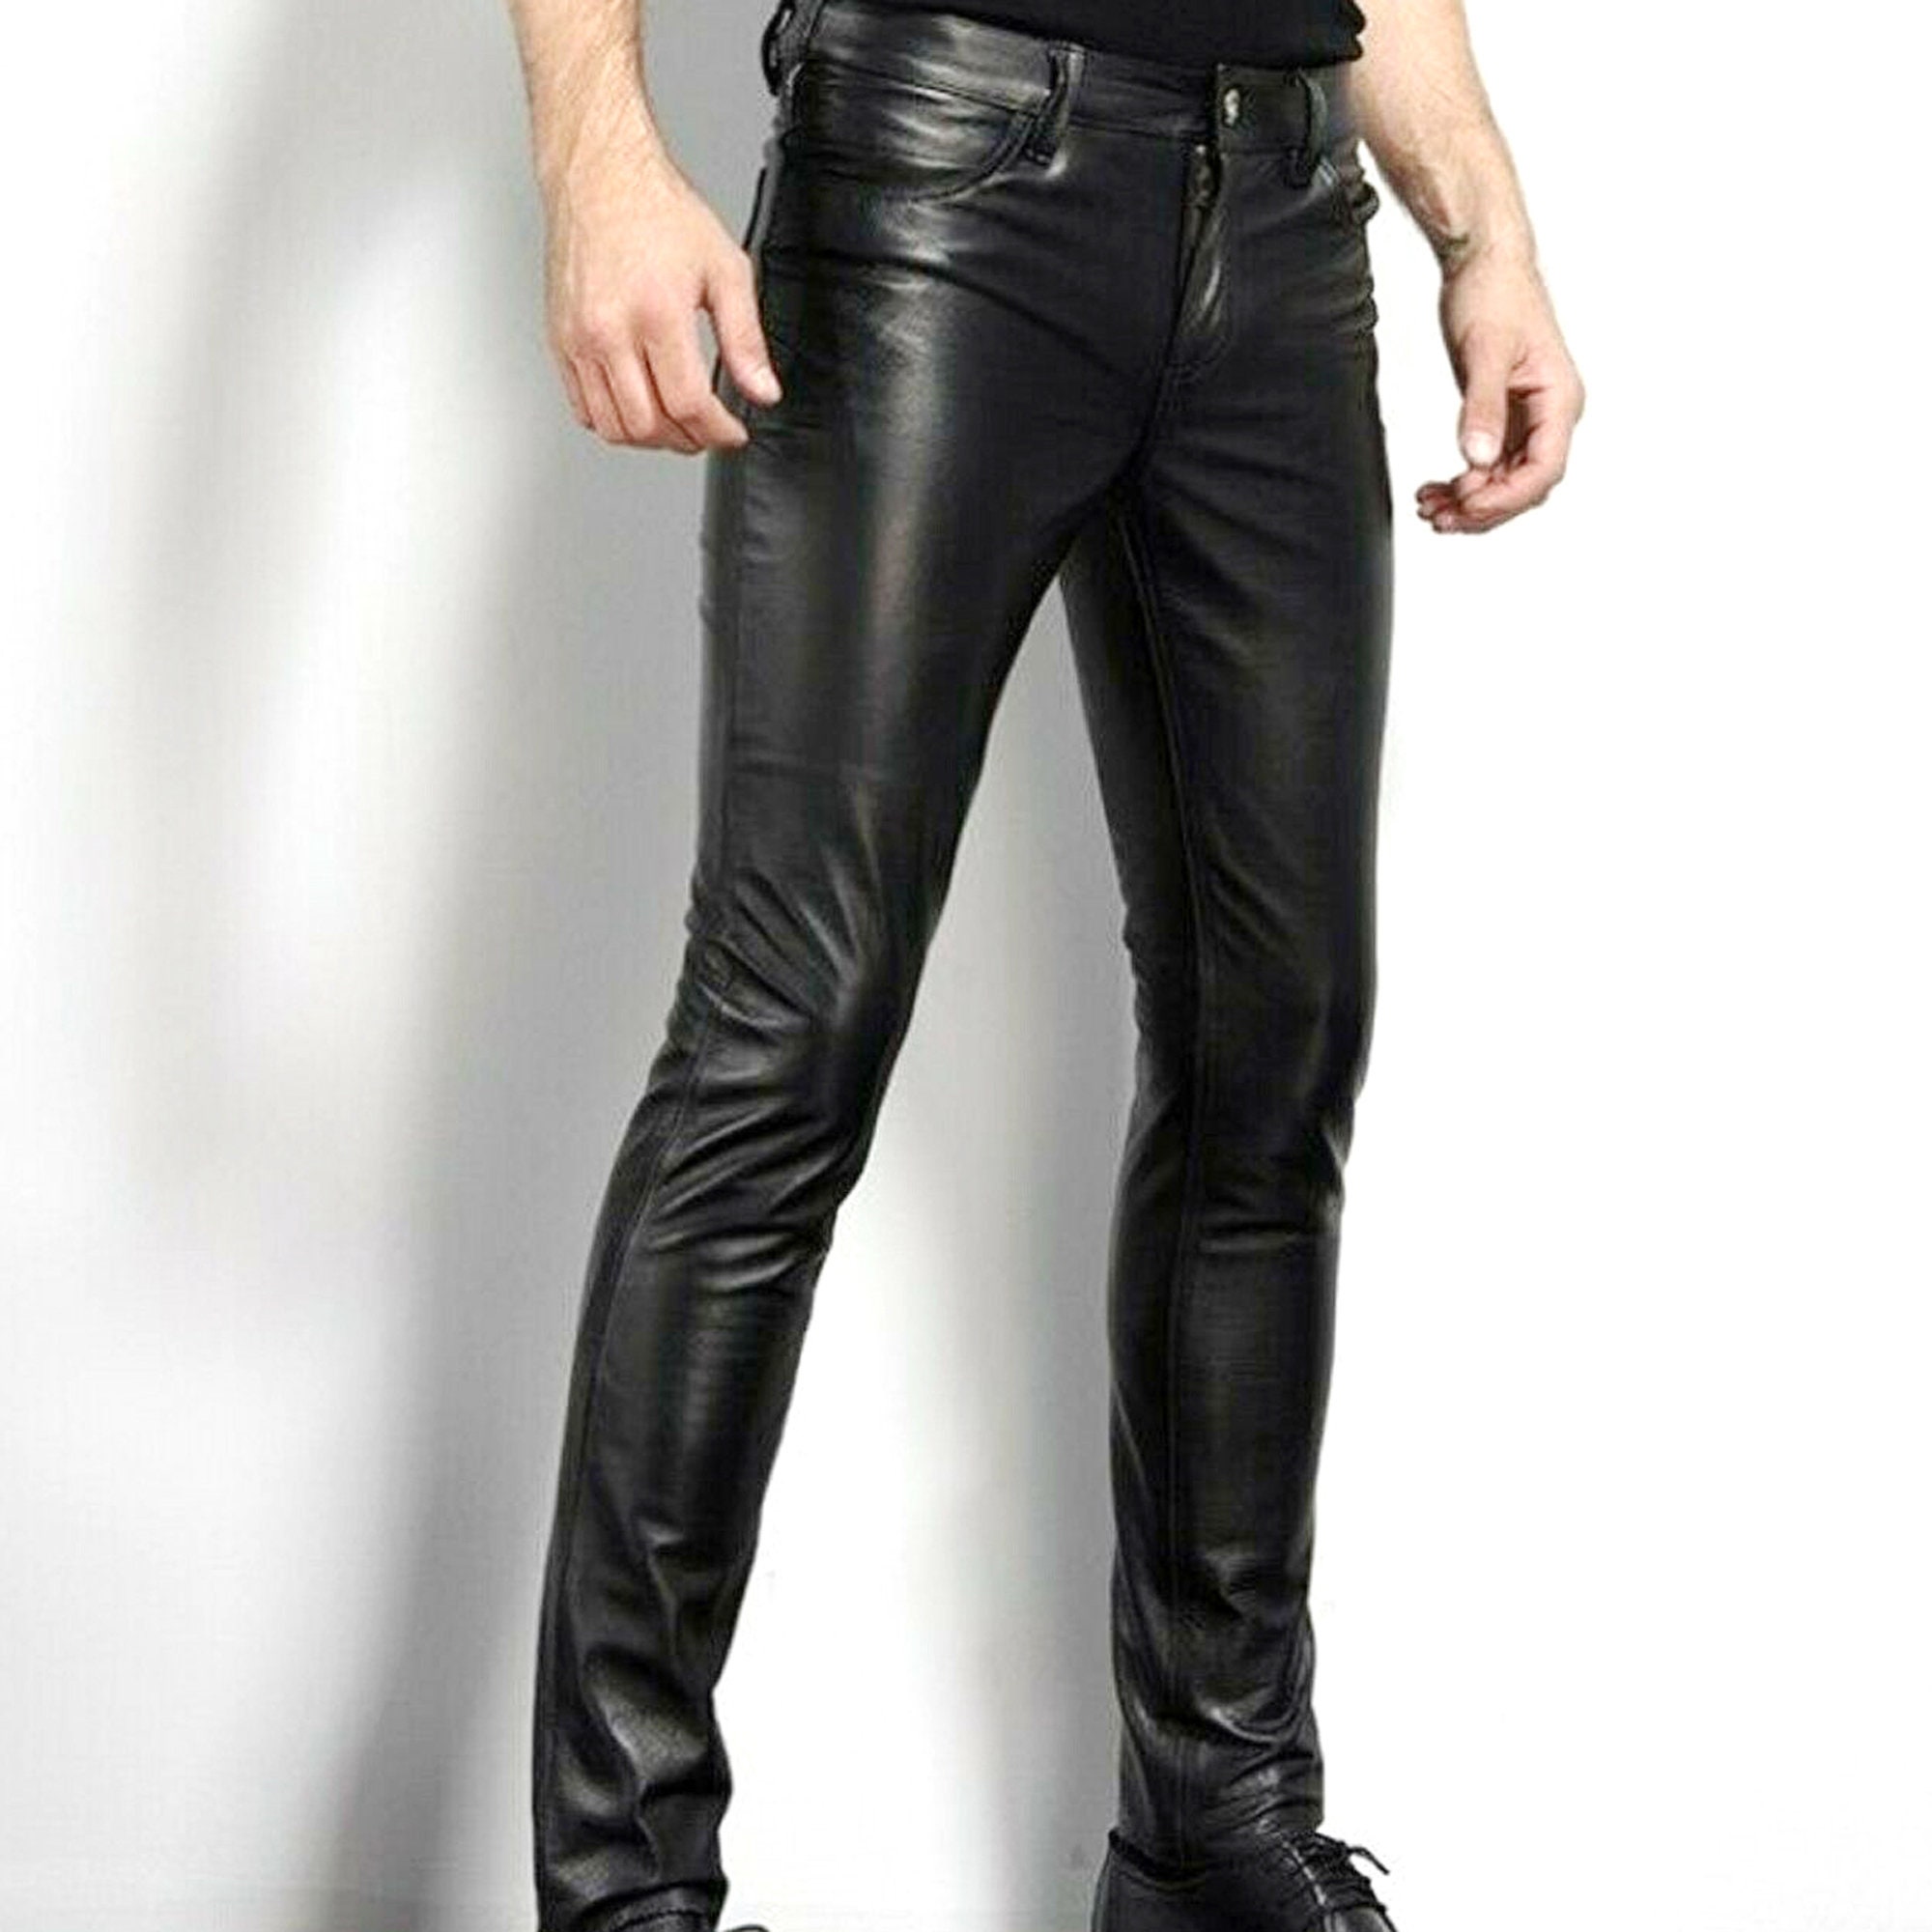 Leather Pants for Men's, Handmade Vegan Leather Jeans Pants